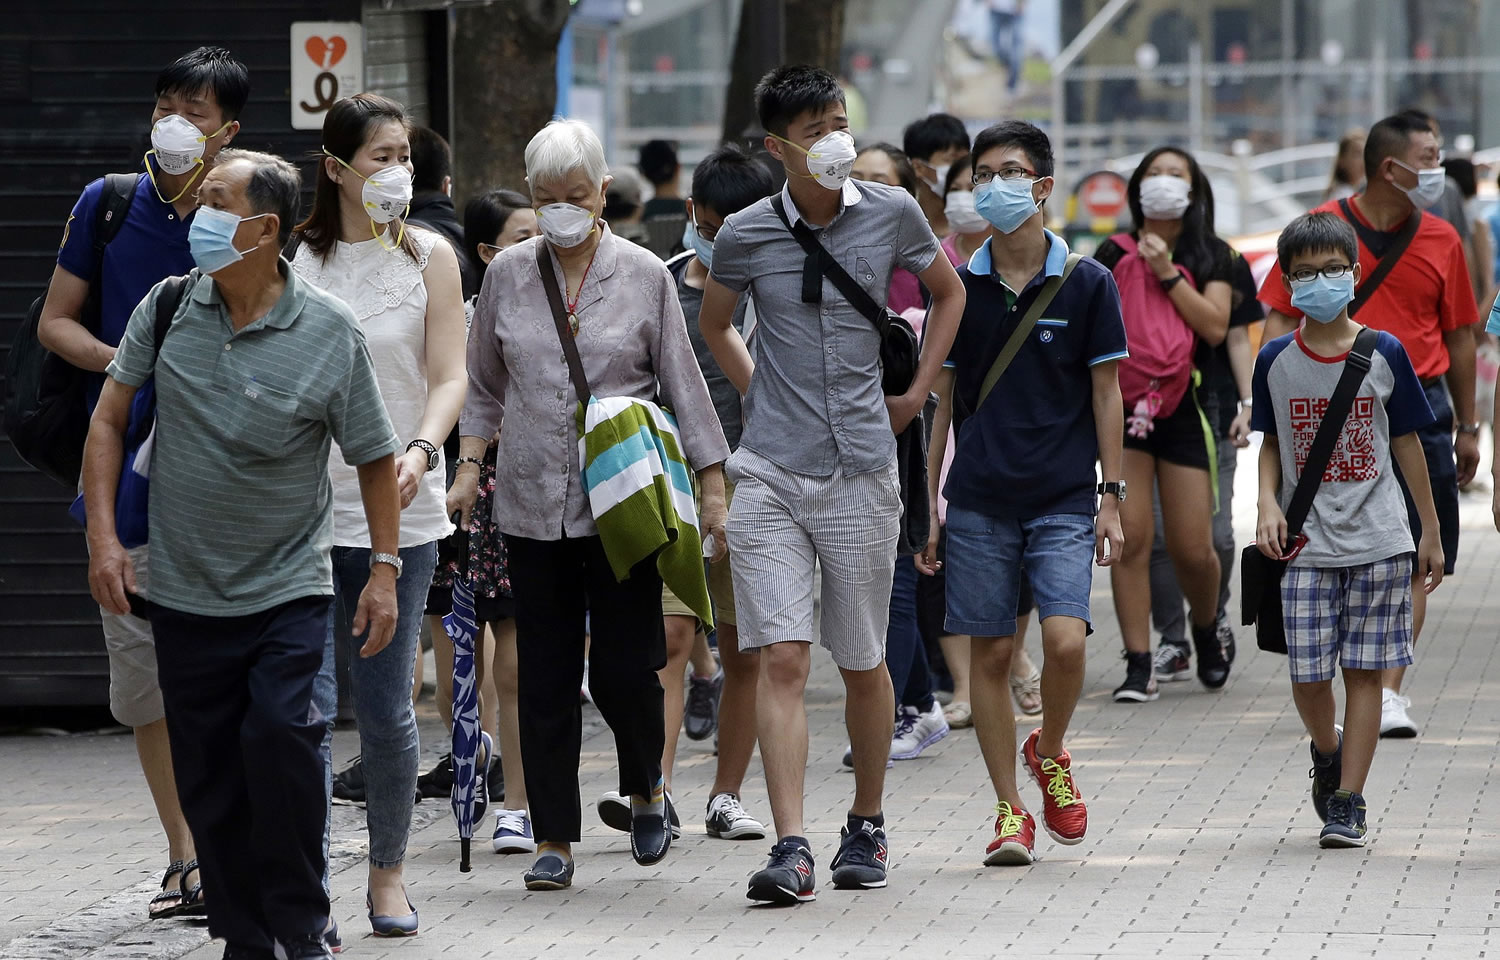 Visitors wearing masks as a precaution against the MERS (Middle East Respiratory Syndrome) virus walk at a shopping district in Seoul, South Korea, on Tuesday.